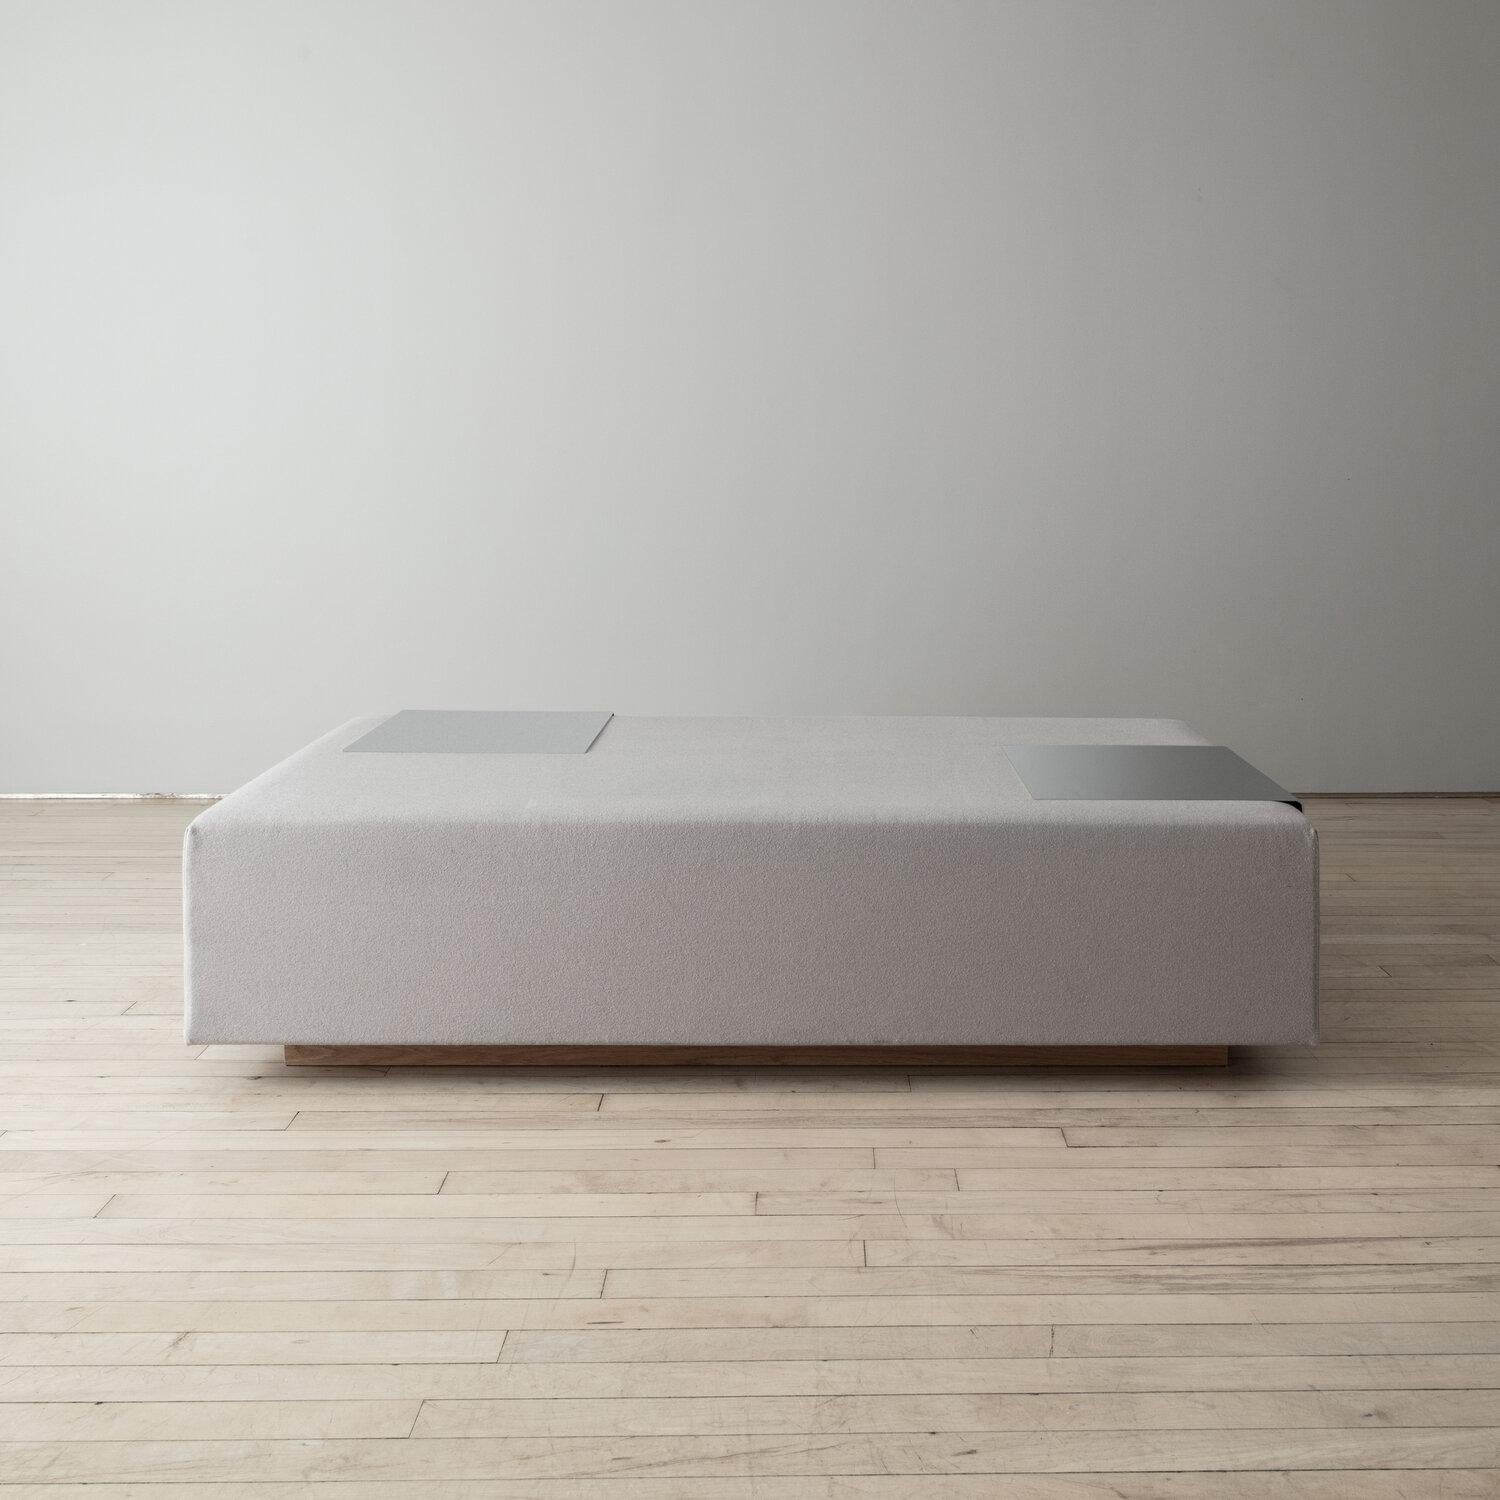 Sidigi Low Table by Angie Anakis and Domeau & Pérès In New Condition For Sale In New York, NY